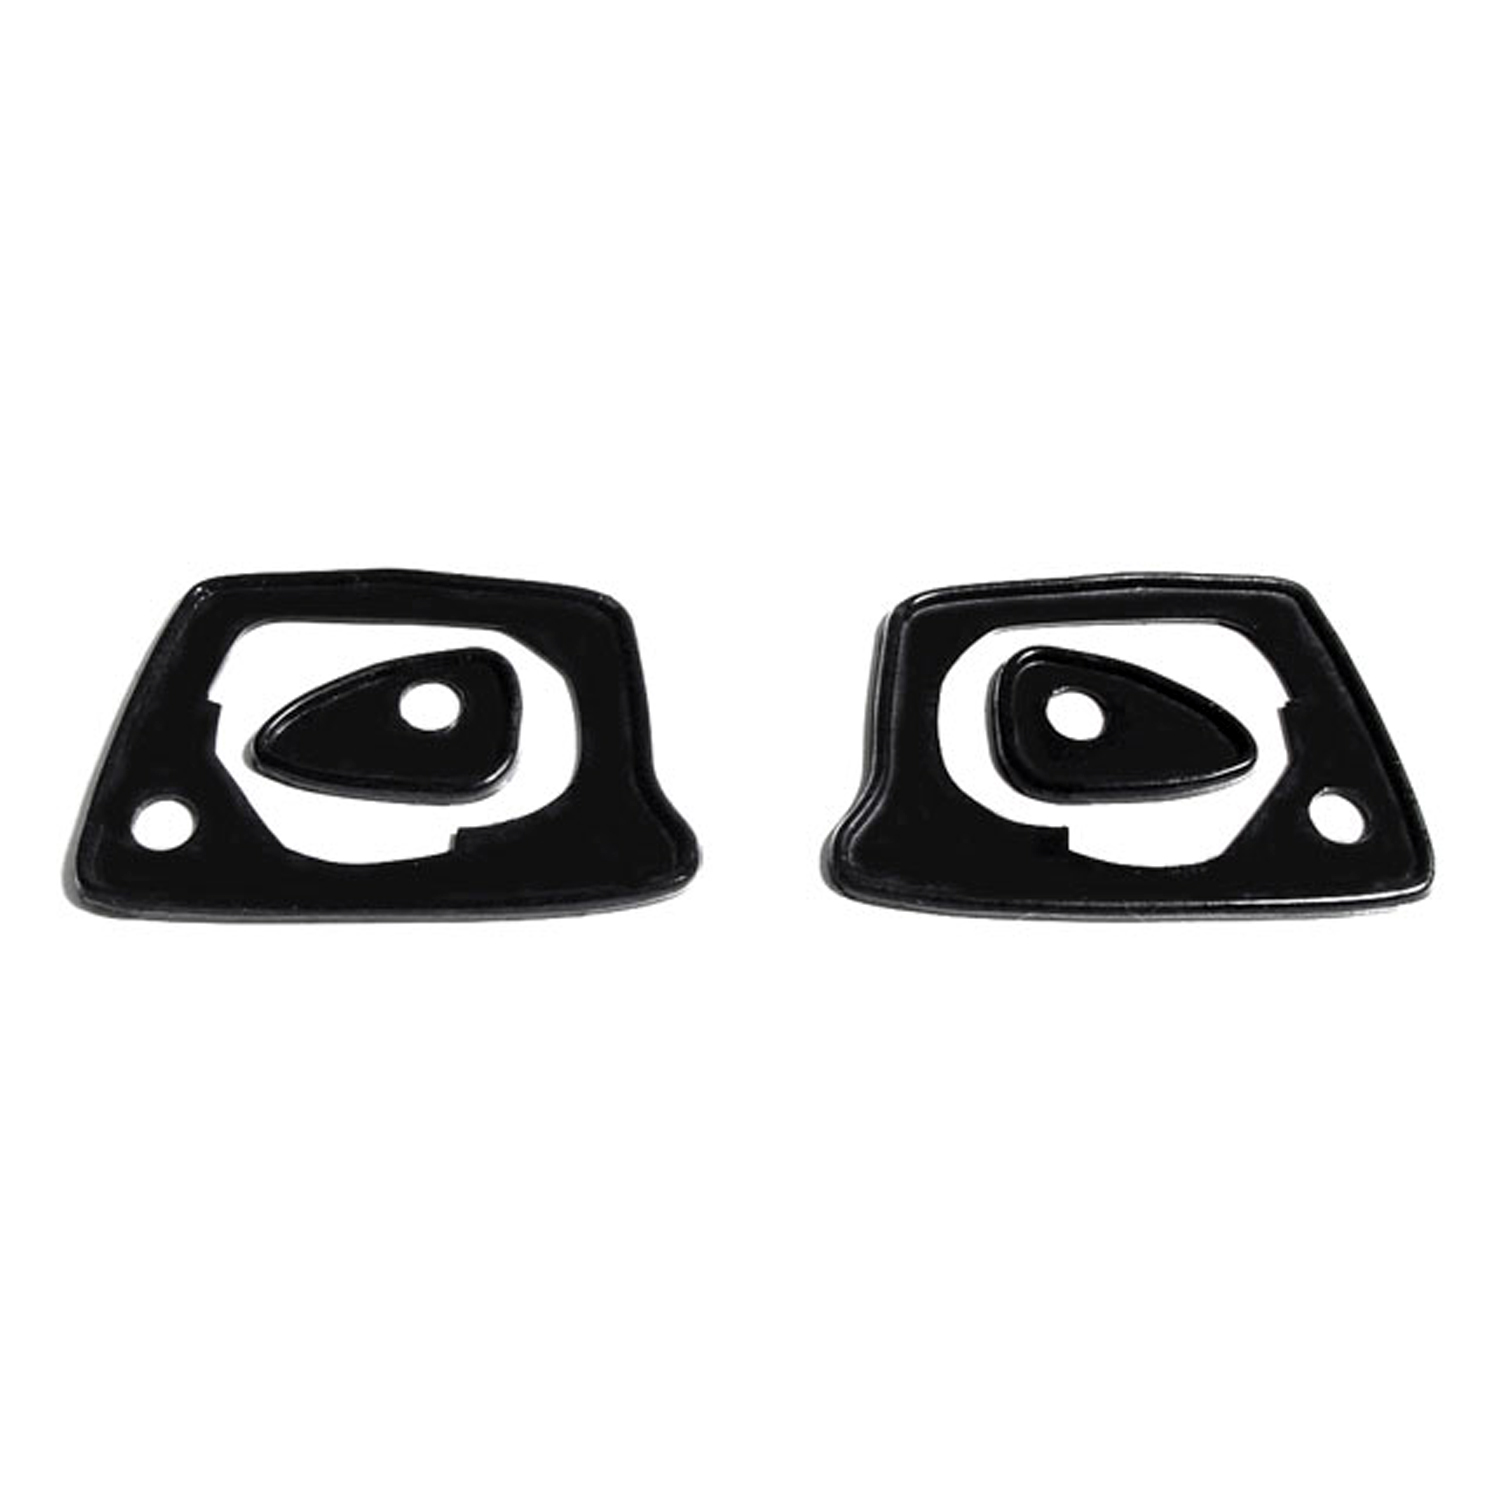 1974 Plymouth Fury I Door handle mounting pads.  2-3/8 in. L x 1-1/8 in. L-MP 959-B